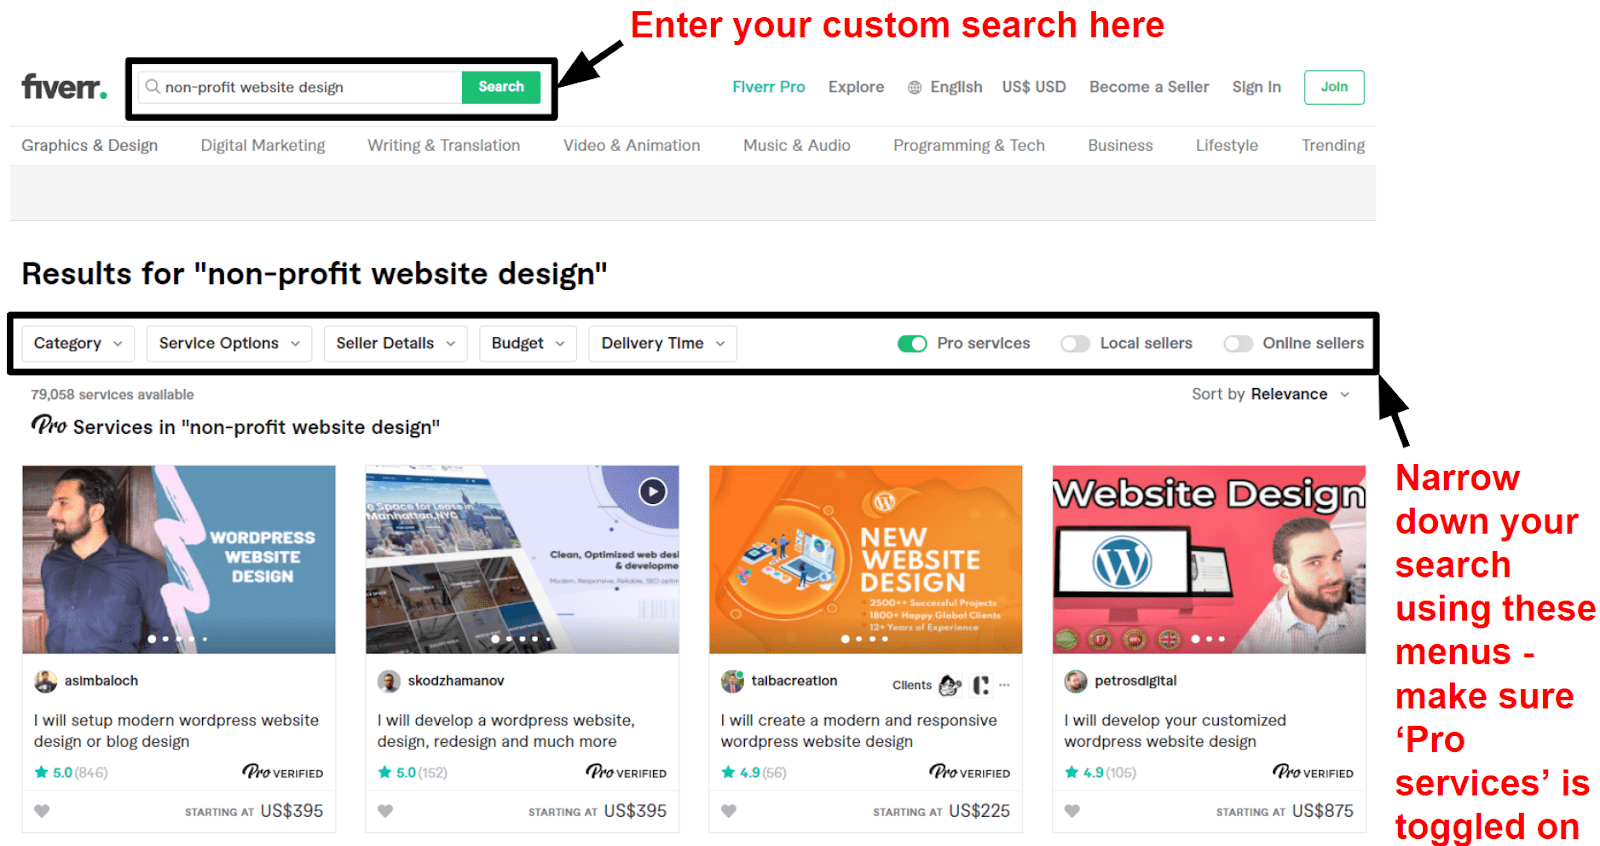 Searching for non-profit website designers on Fiverr